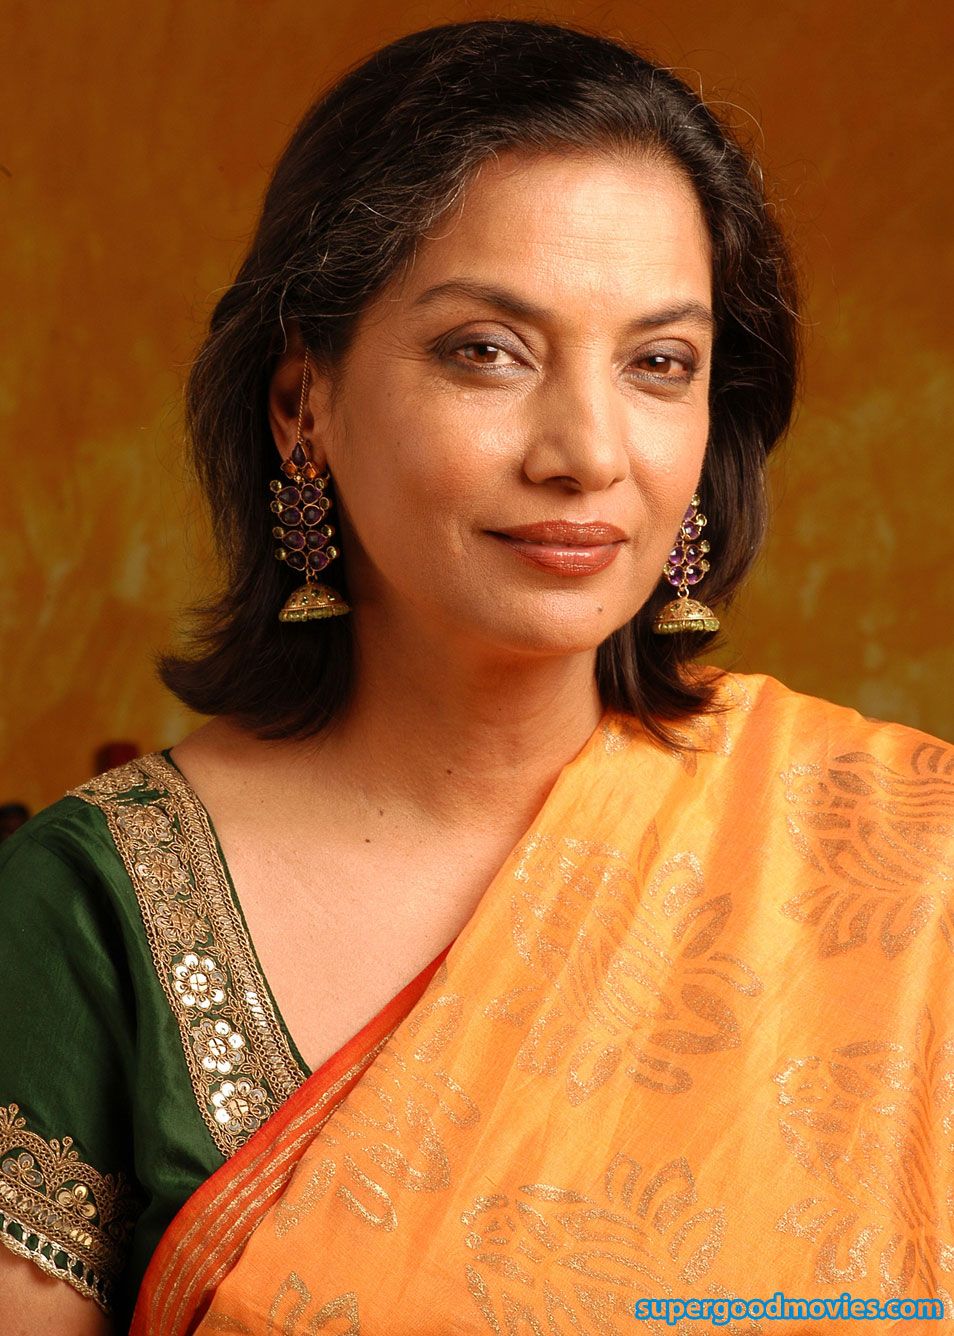 While most of the actresses stuck to commercial cinema, Shabana Azmi chose to break the n. World most beautiful woman, Bollywood celebrities, Most beautiful women